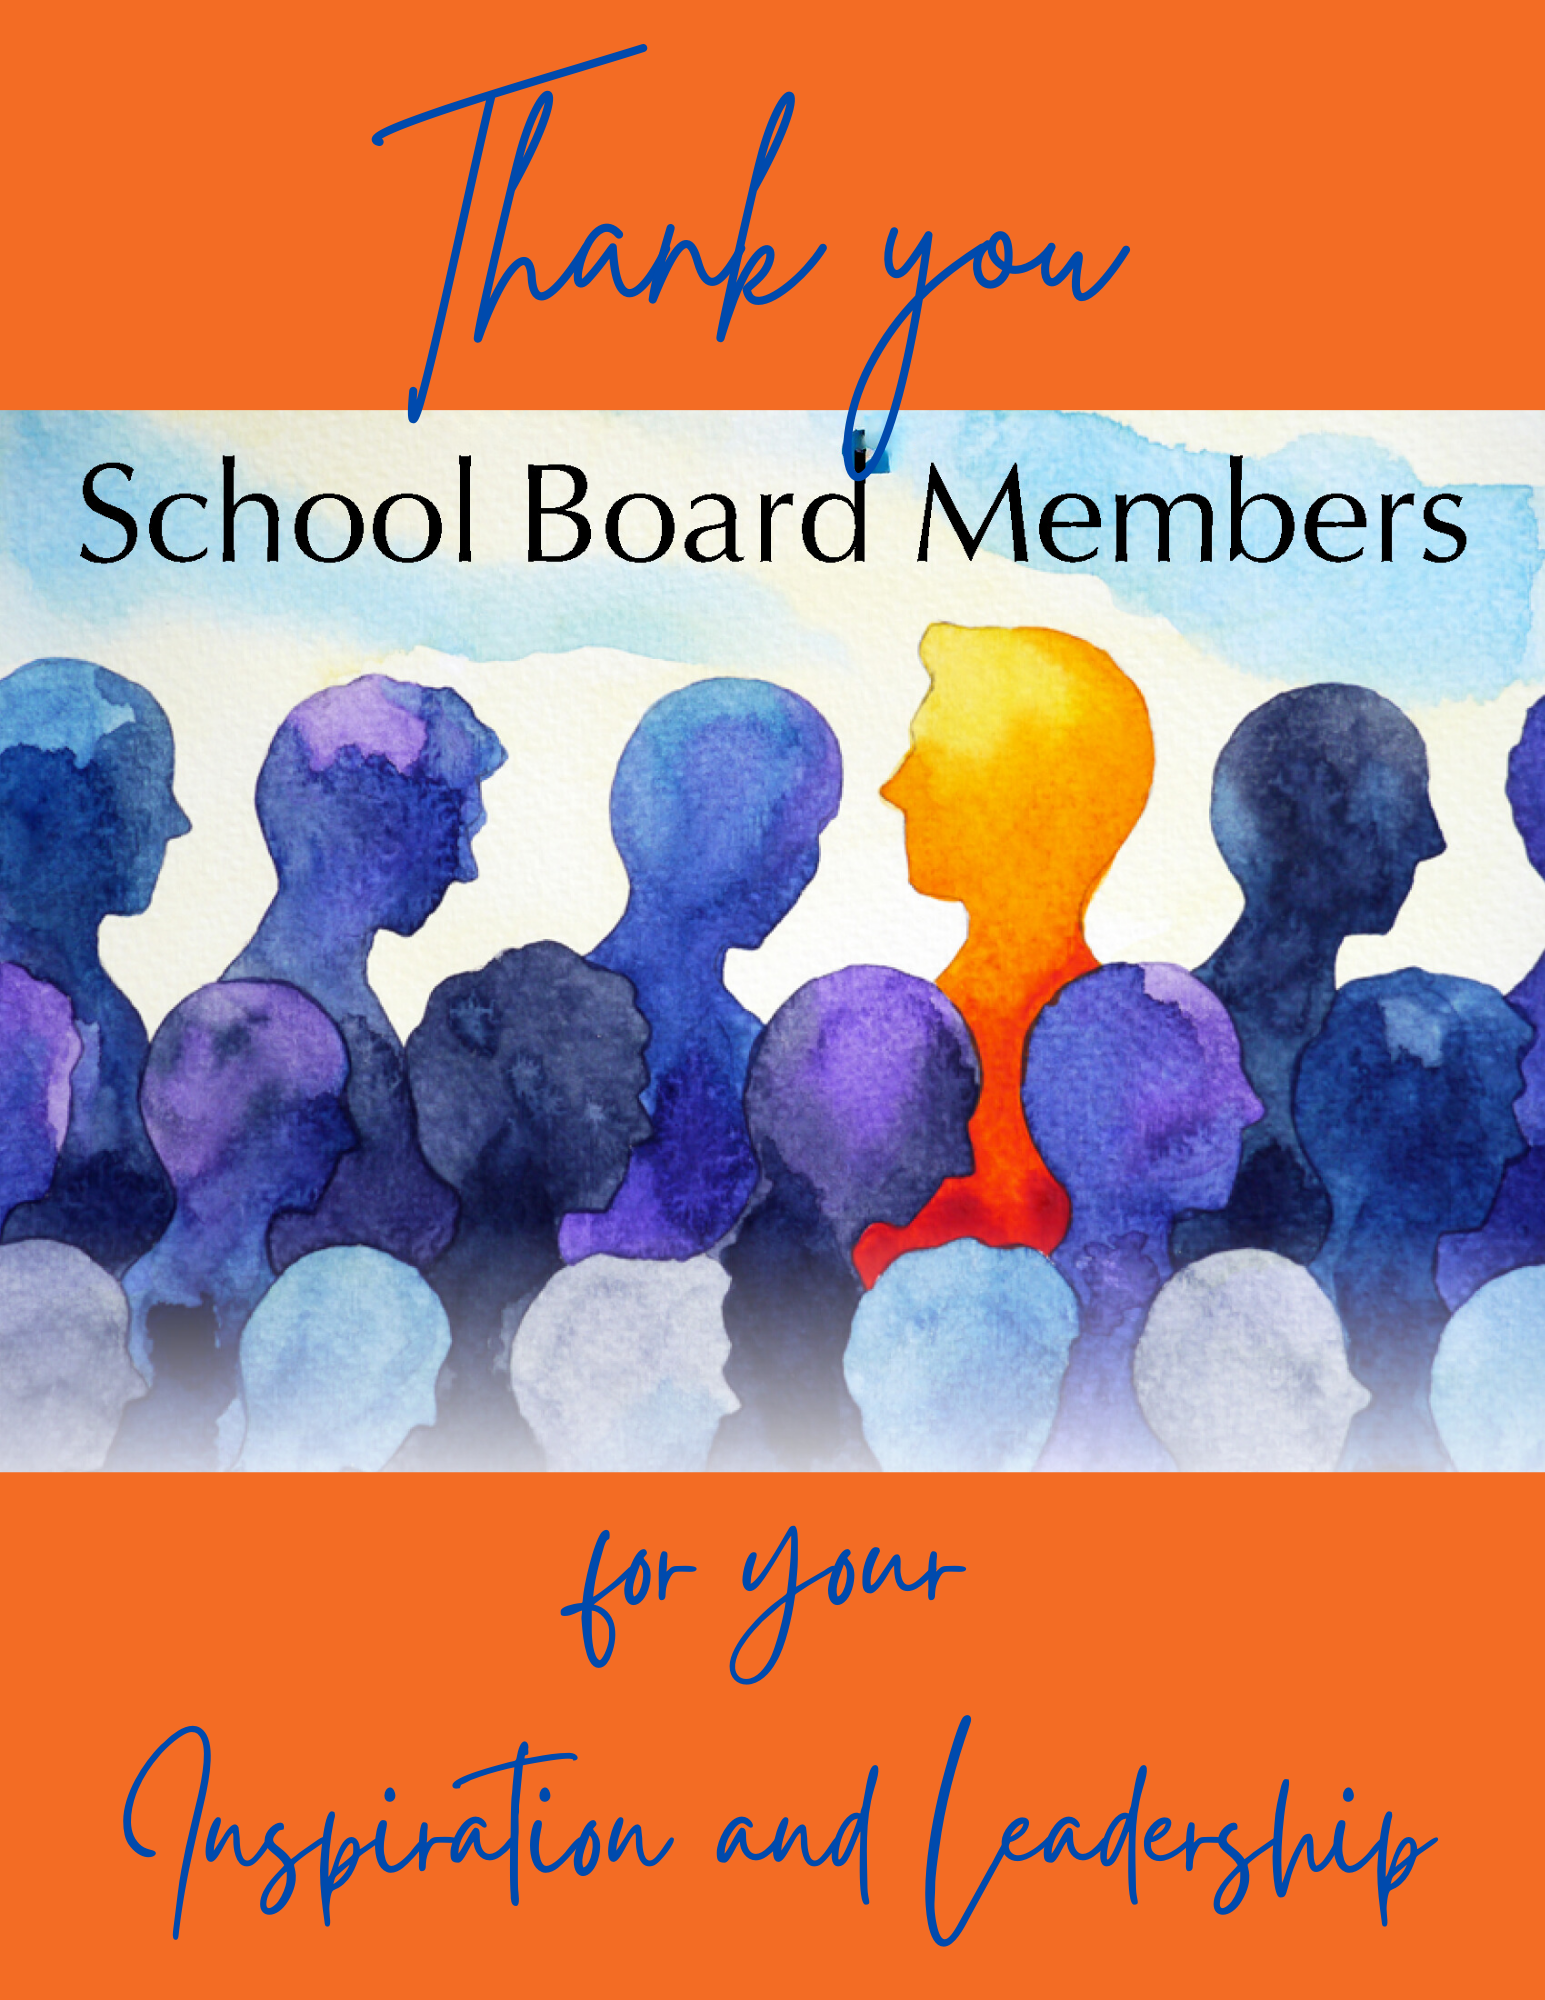 JANUARY IS NATIONAL SCHOOL BOARD MEMBER RECOGNITION MONTH